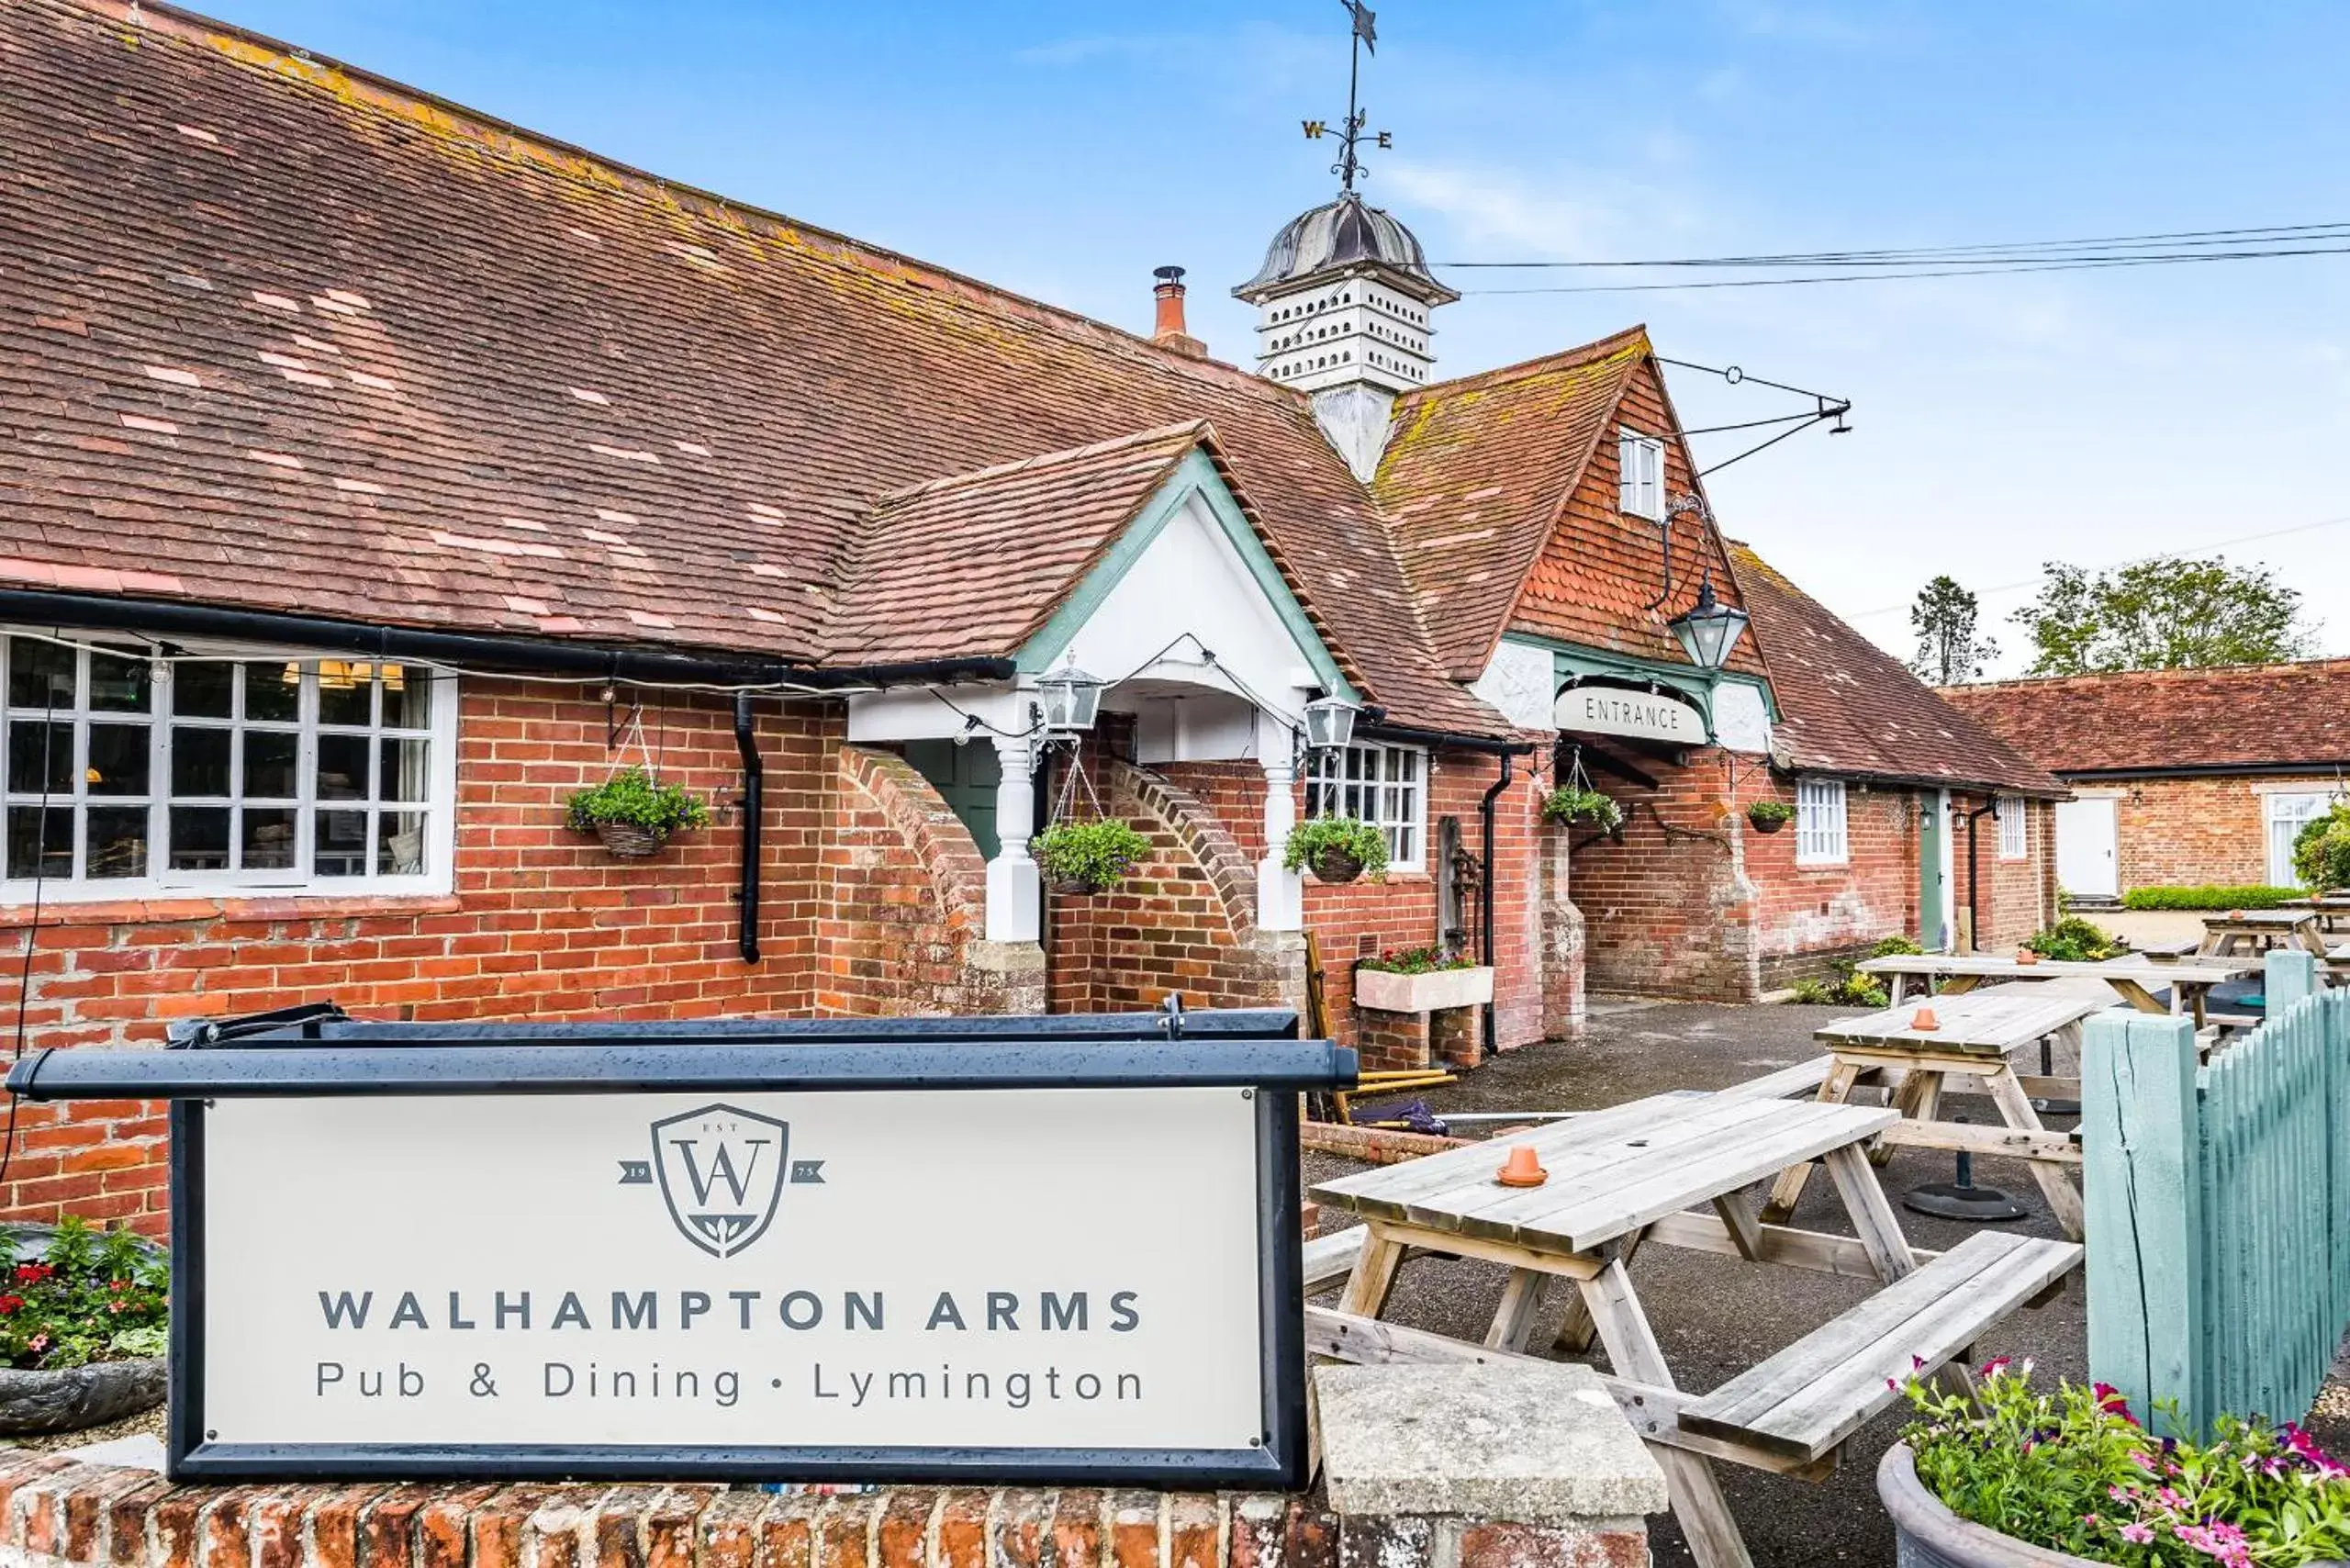 Property Building in The Walhampton Arms